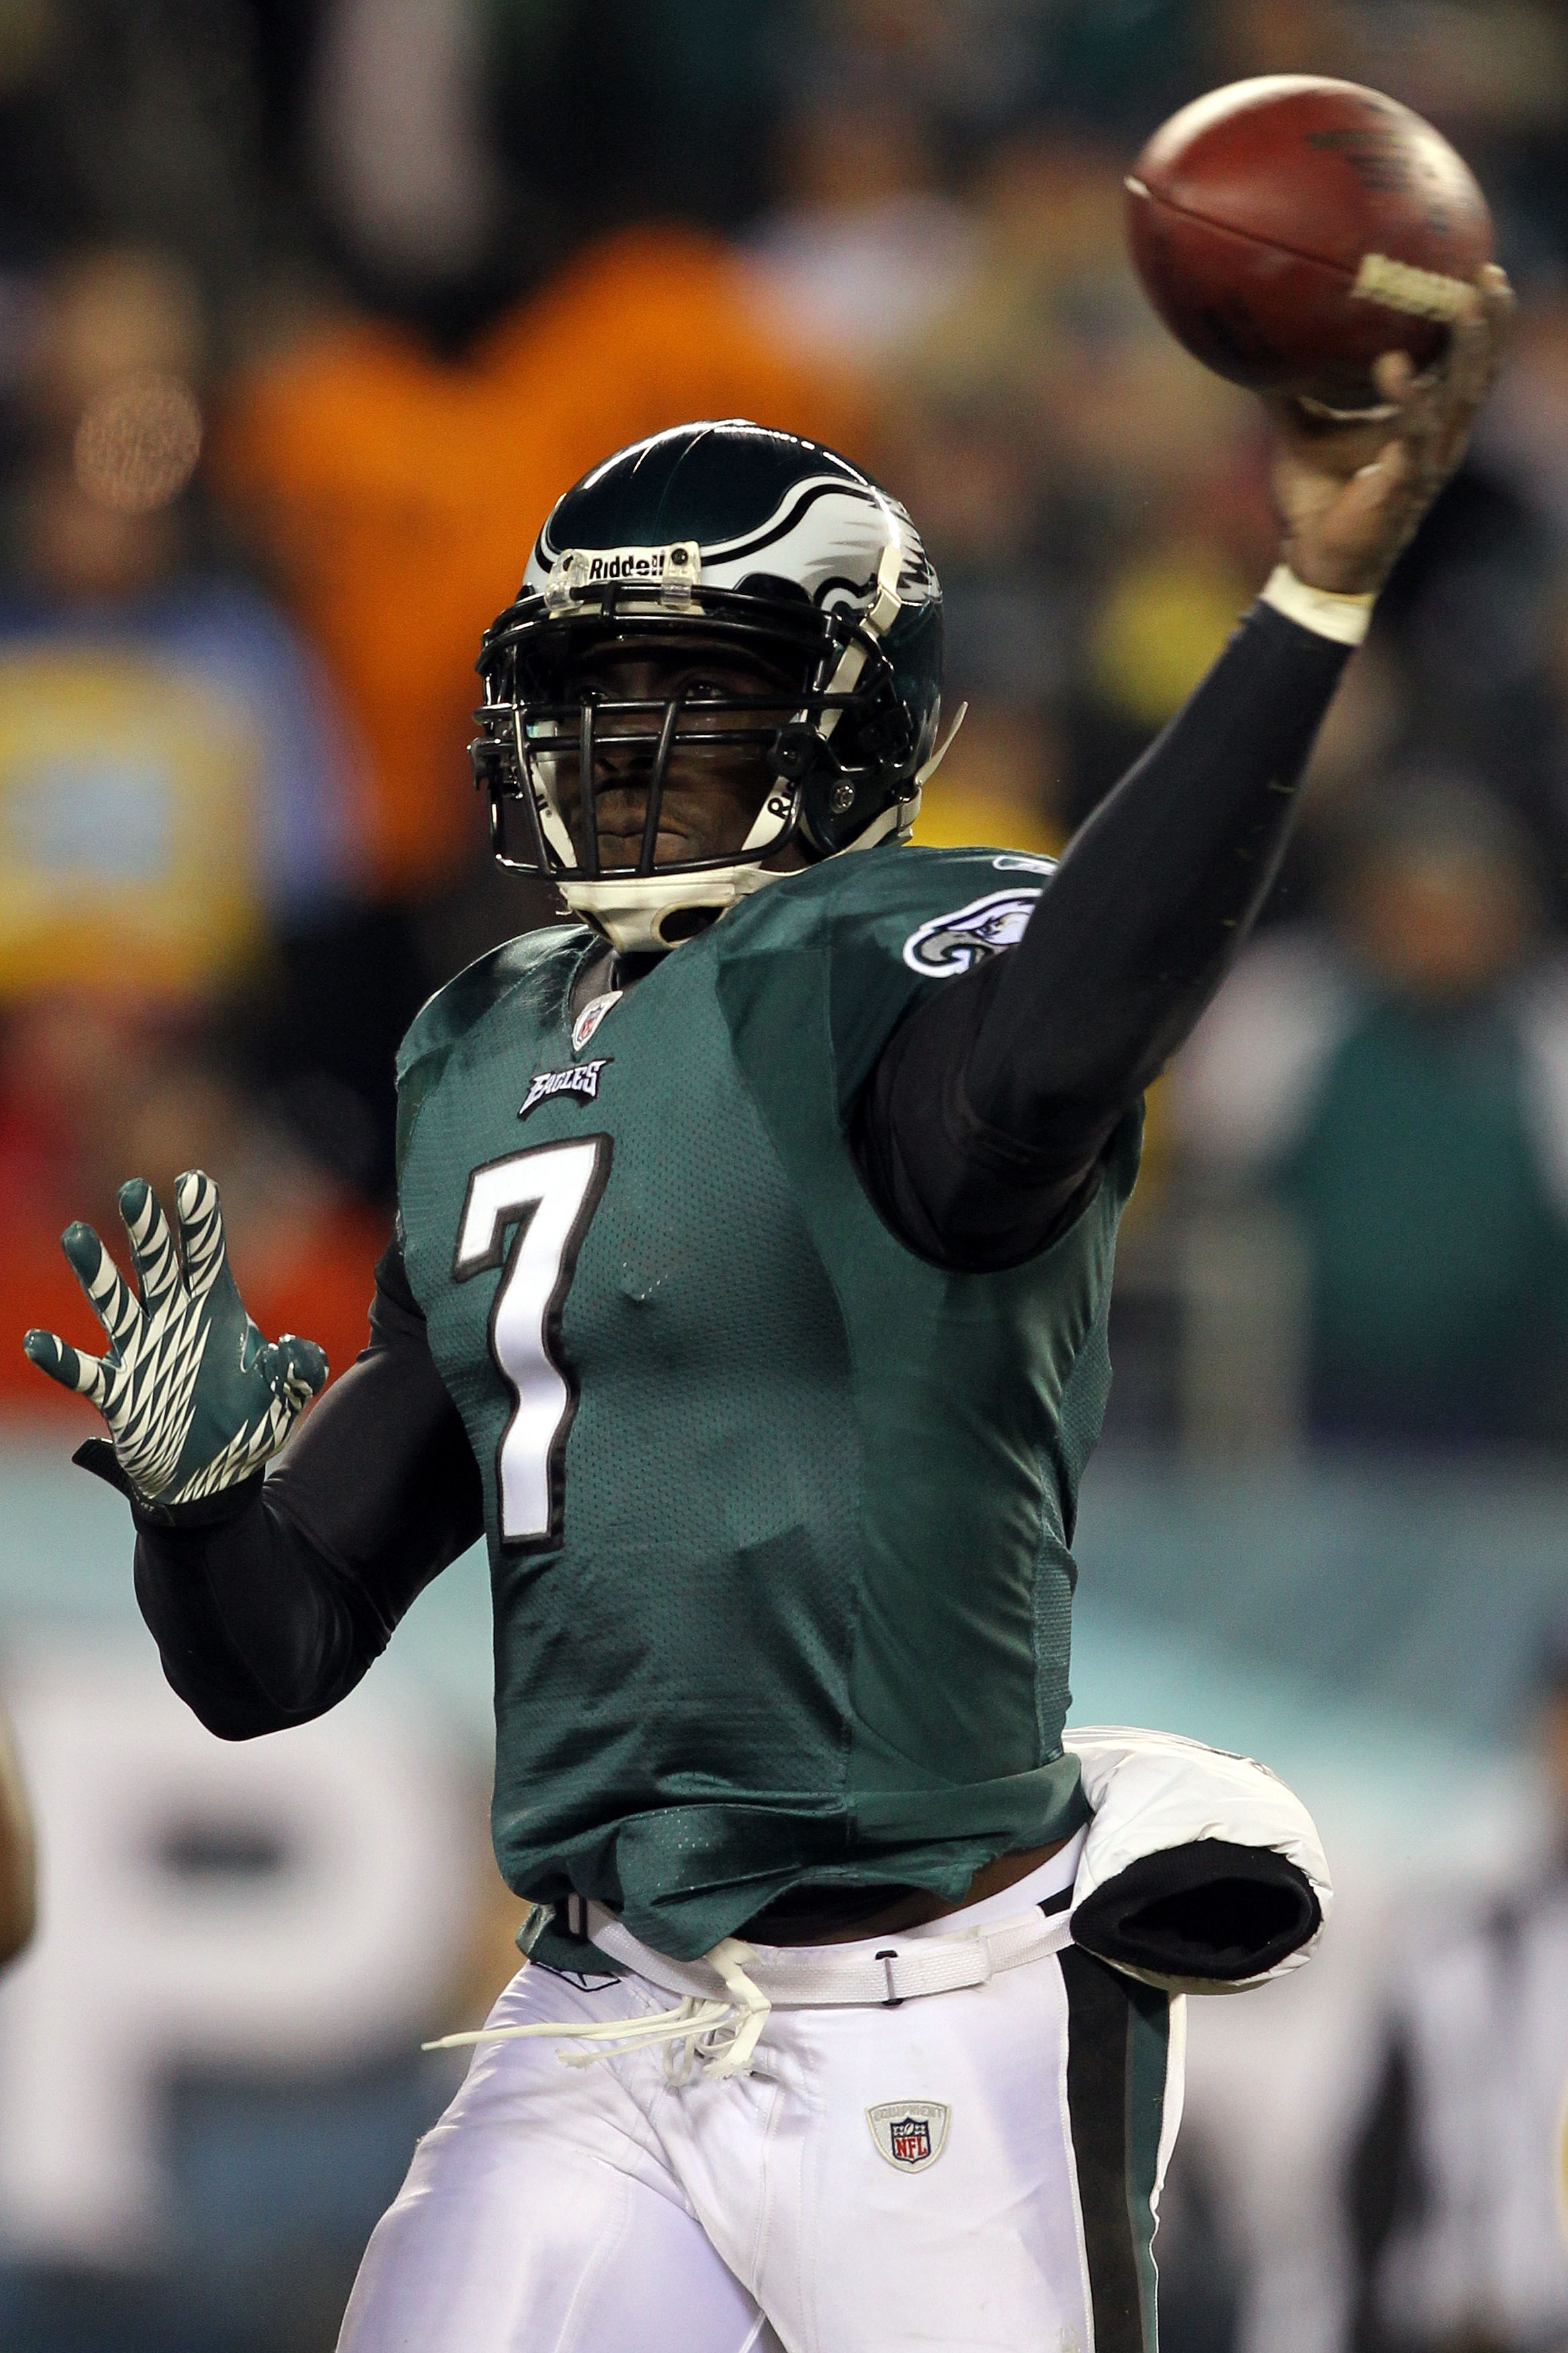 PHILADELPHIA, PA - JANUARY 09:  Michael Vick #7 of the Philadelphia Eagles passes against the Green Bay Packers during the 2011 NFC wild card playoff game at Lincoln Financial Field on January 9, 2011 in Philadelphia, Pennsylvania.  (Photo by Al Bello/Get